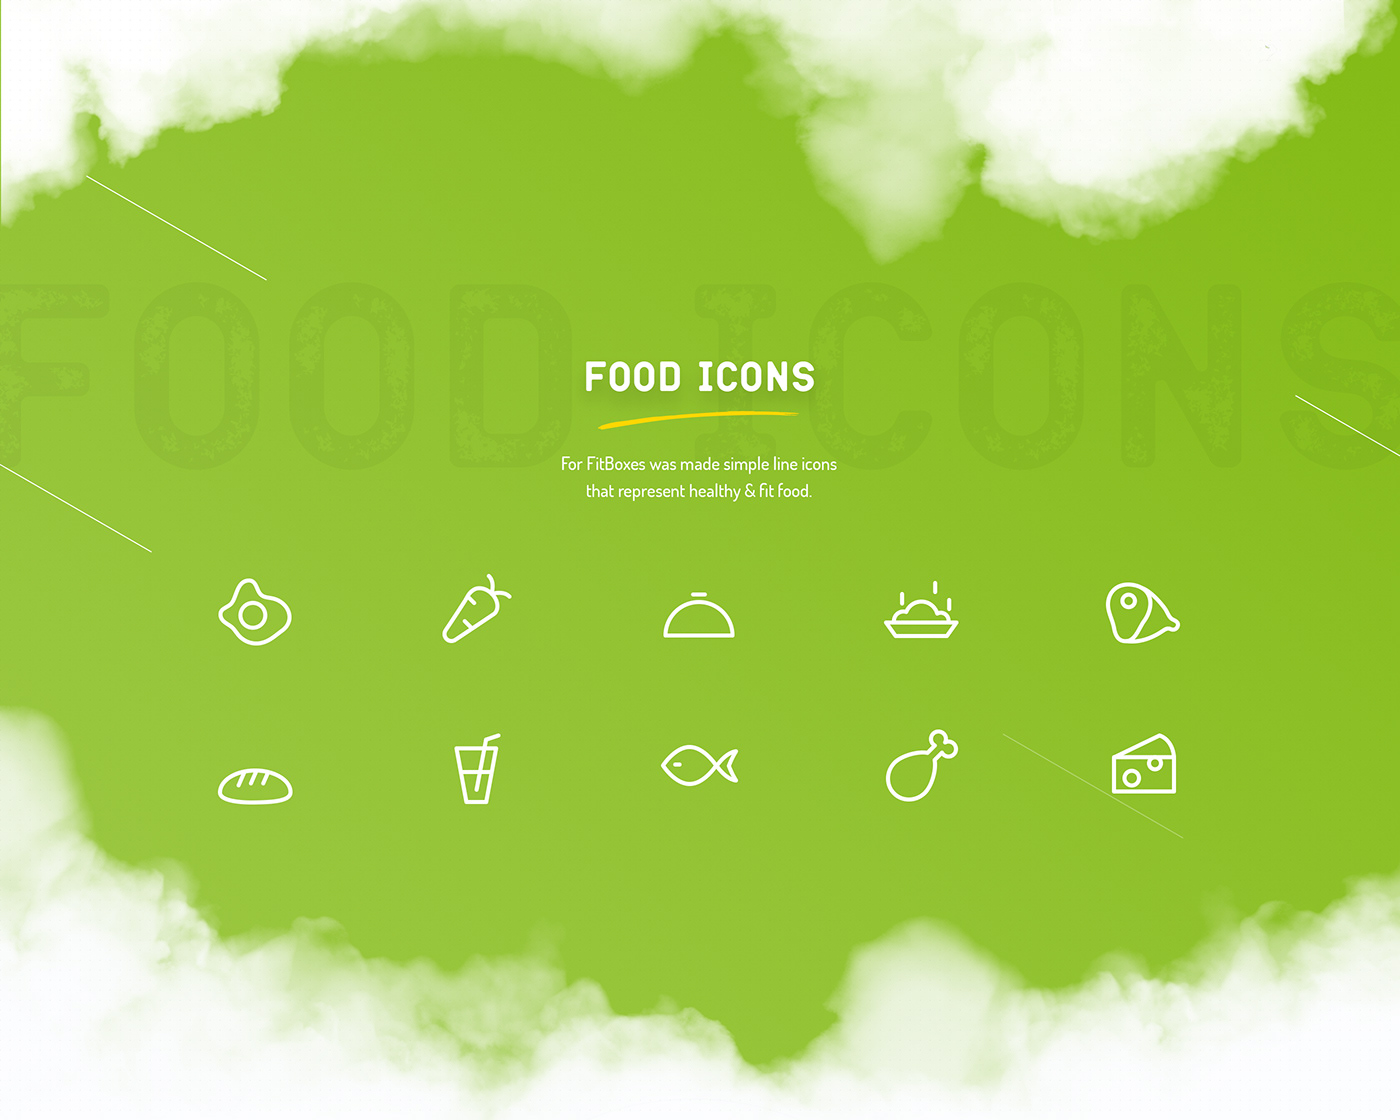 design Web fitness Food  lime Webdesign healthy ux clean green